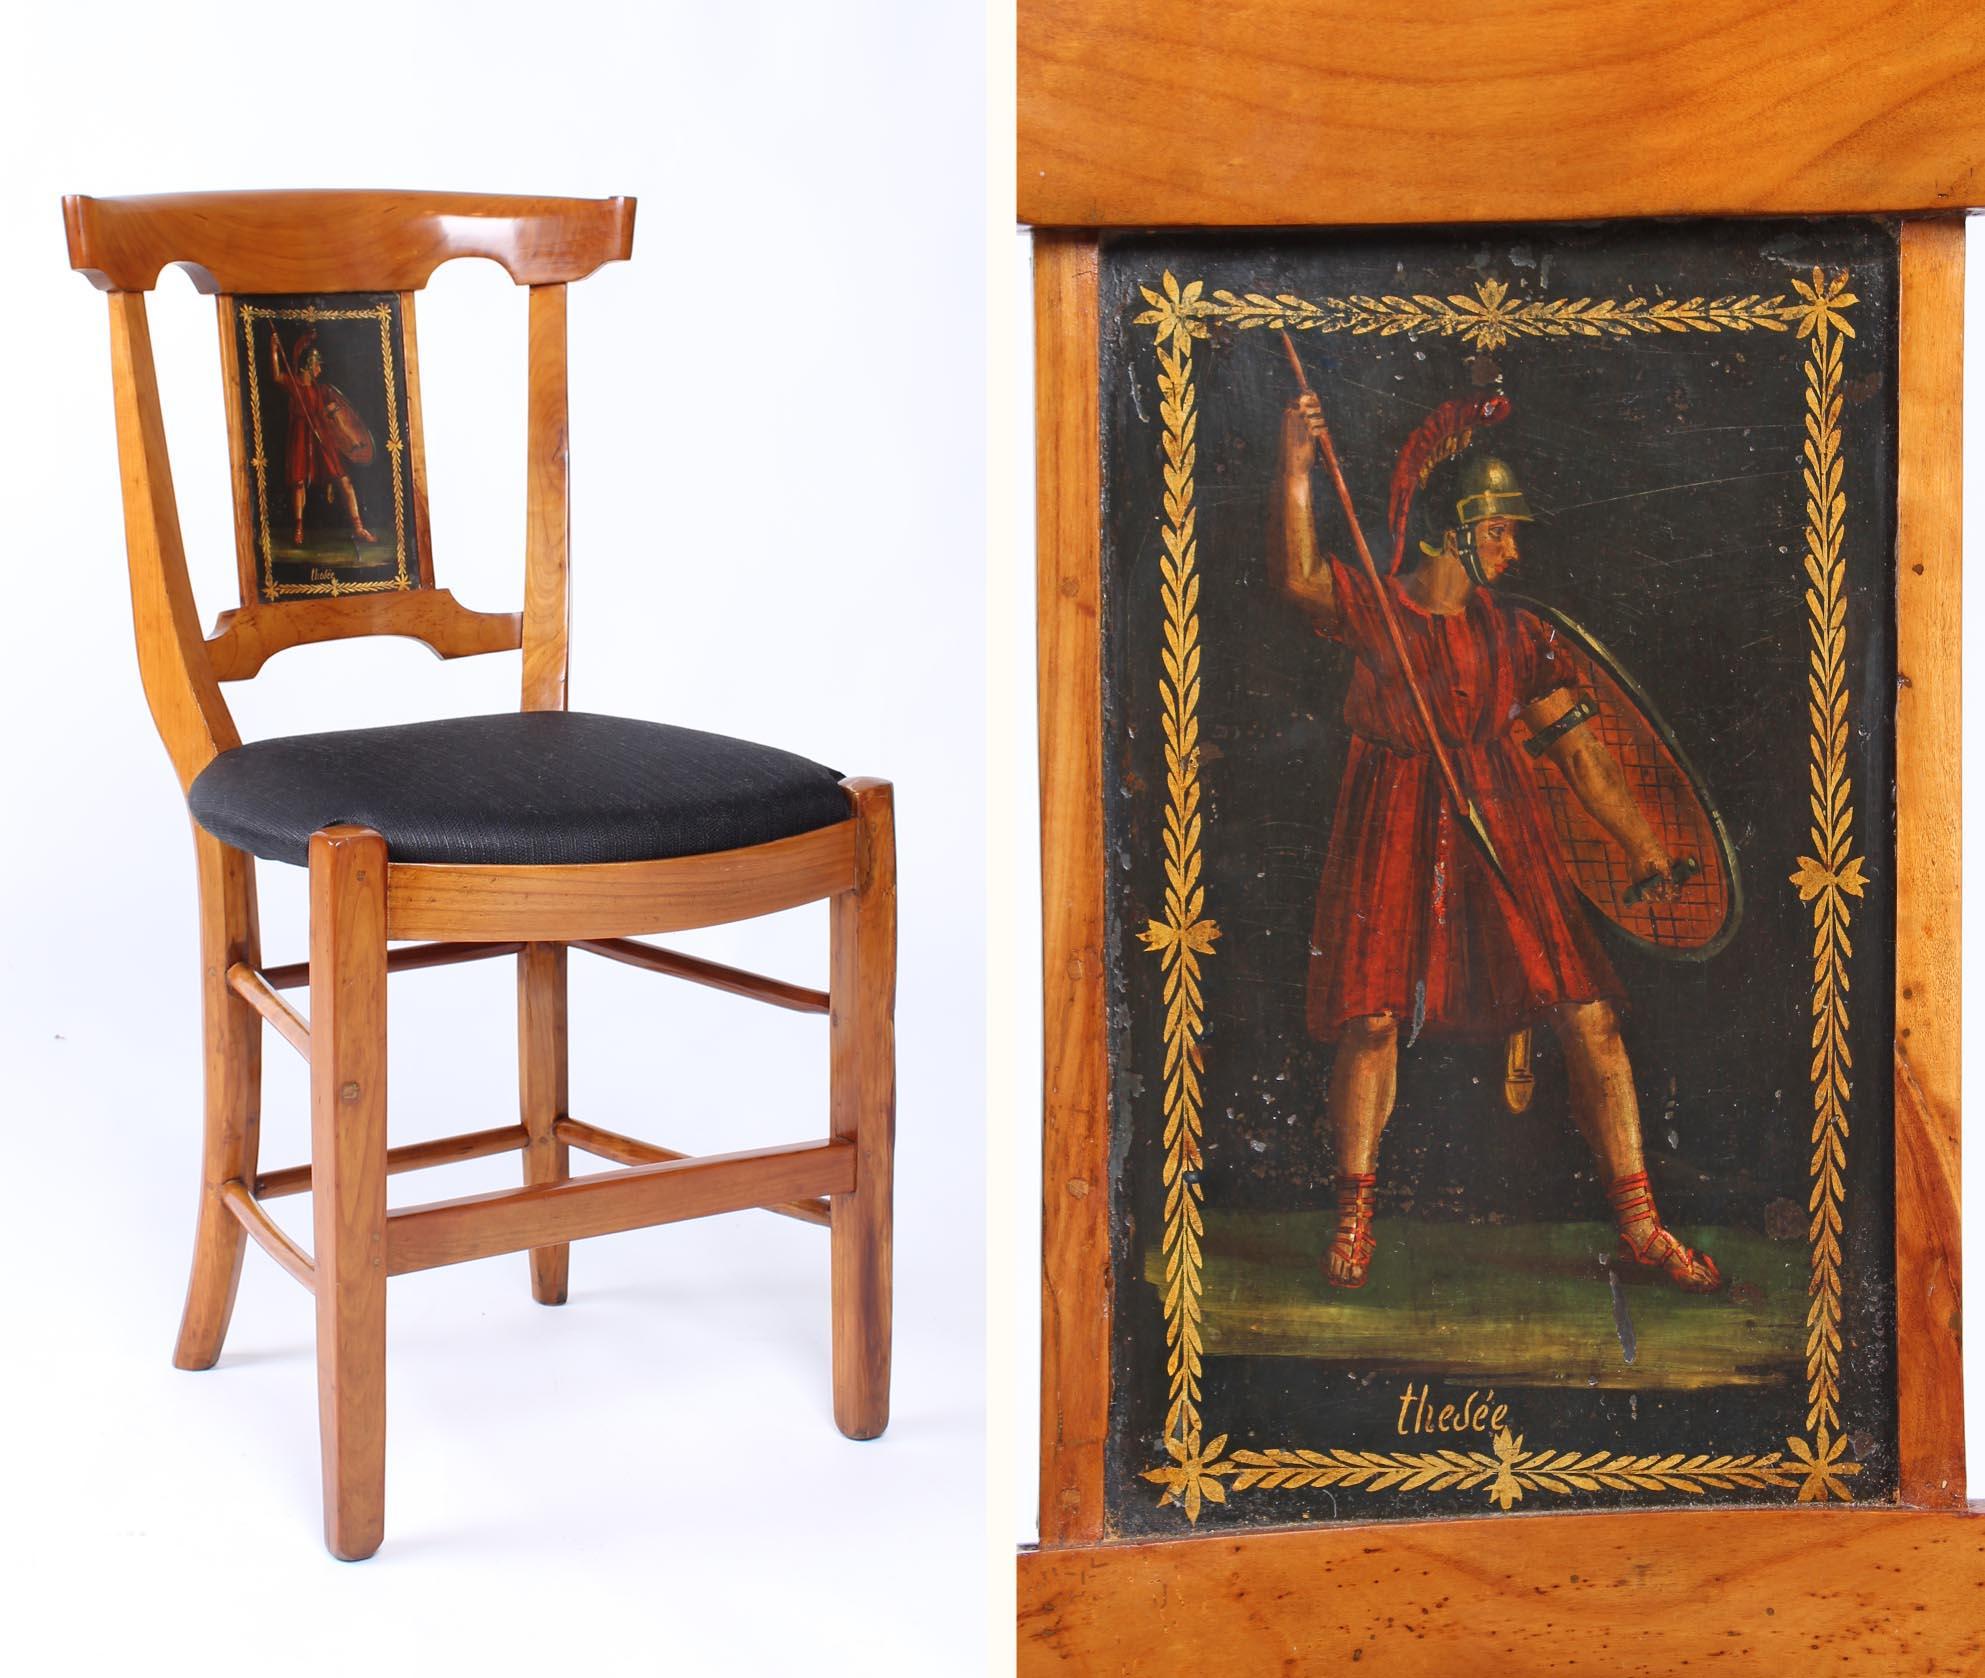 Set of very unusual 18th century chairs

It's a set of four chairs, all with different paintings of the Greek mythology. 

Bourgogne (France)
cherrywood, oil colors
Directoire, circa 1800

Dimensions: height 84 cm, seat height 47 cm

Four